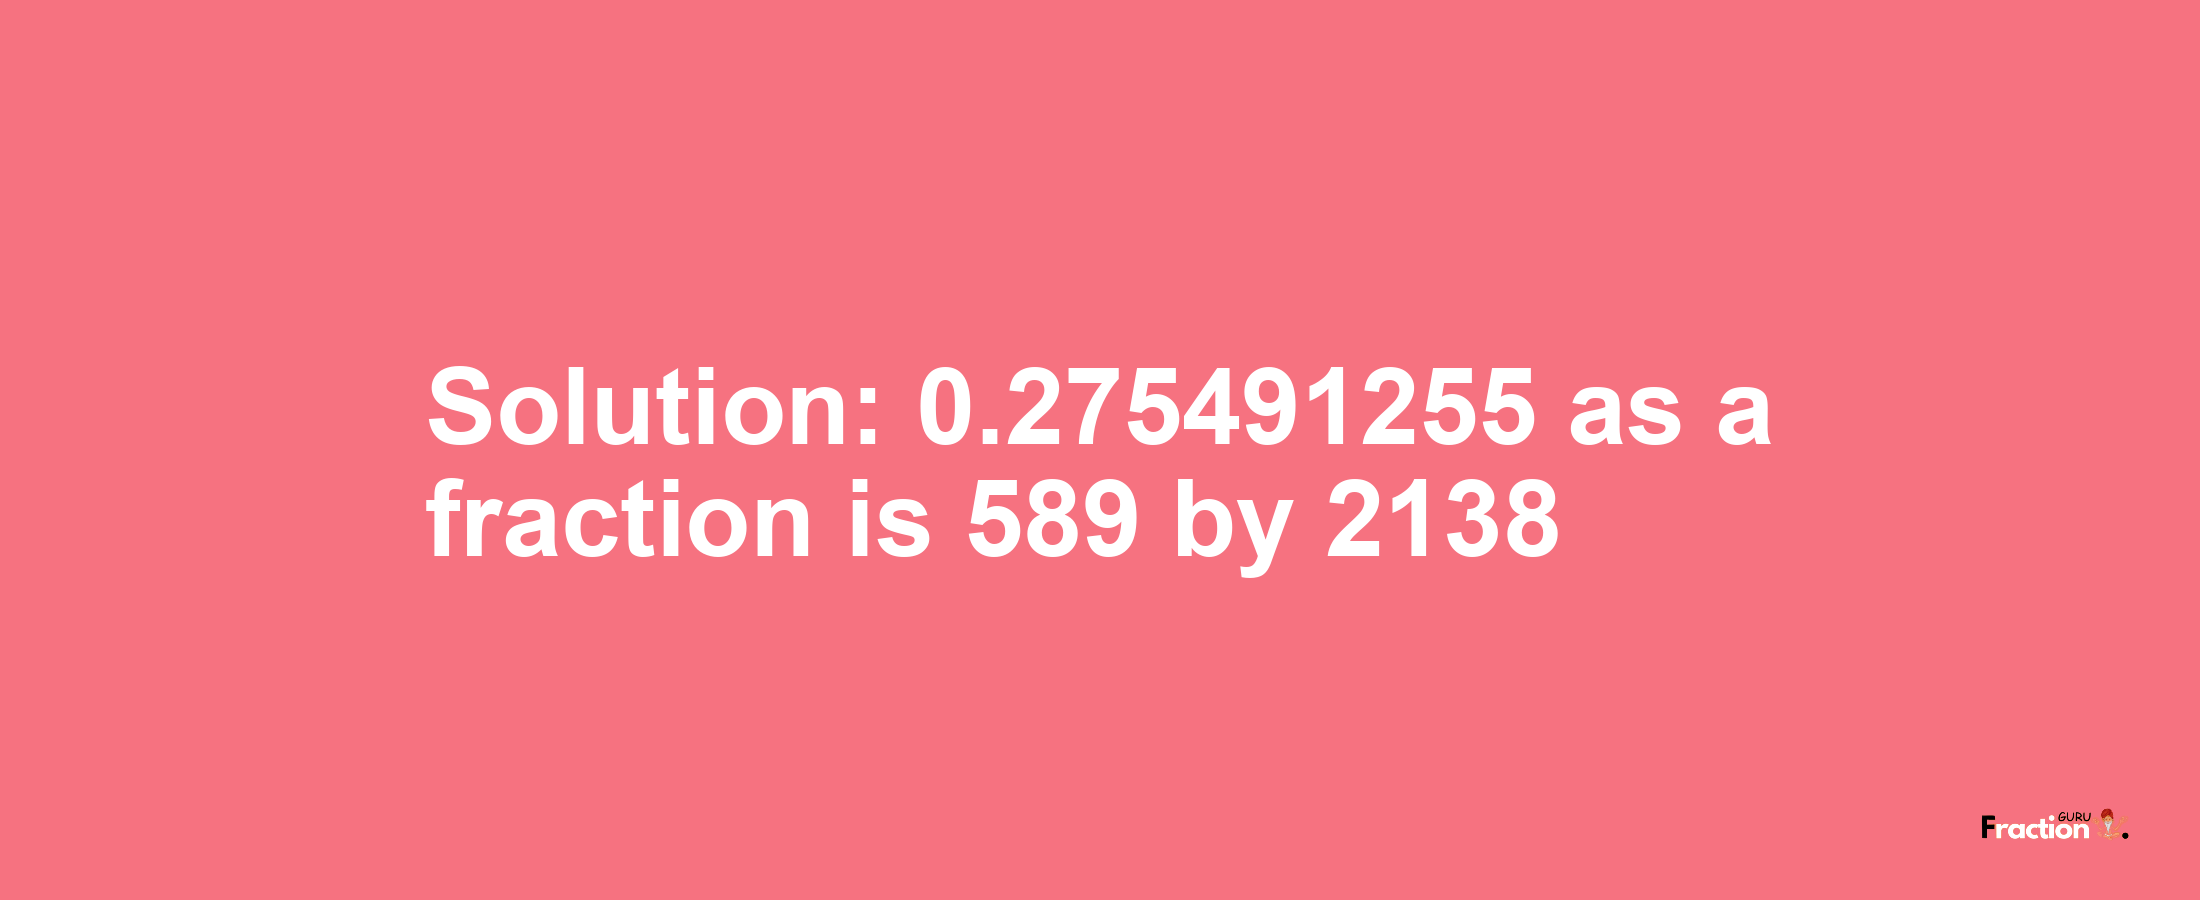 Solution:0.275491255 as a fraction is 589/2138